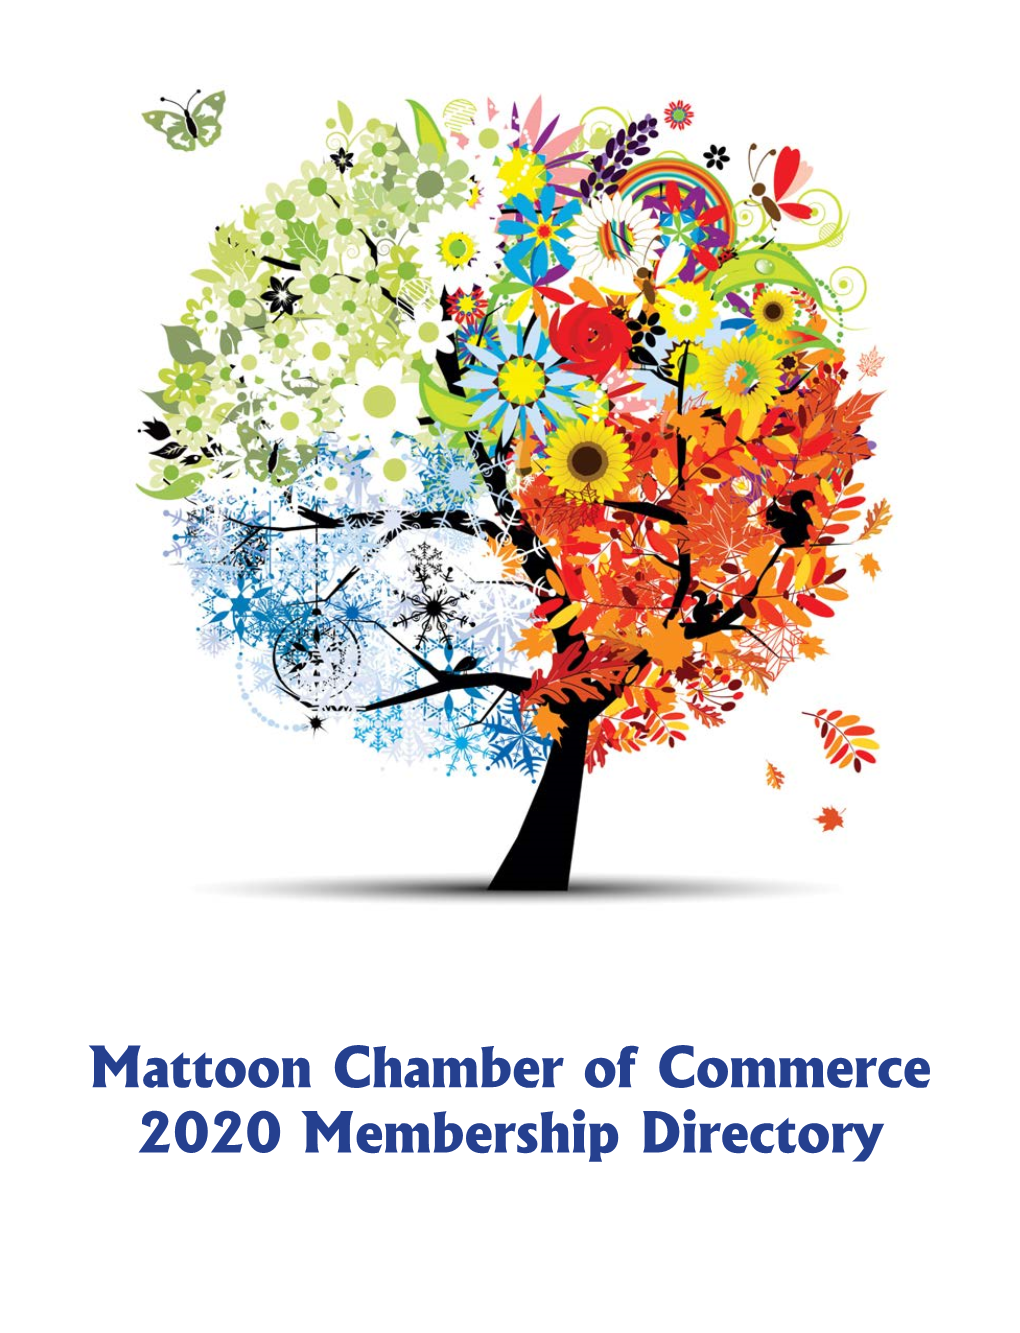 Mattoon Chamber of Commerce 2020 Membership Directory the KINGERY PROMISE T R U S T